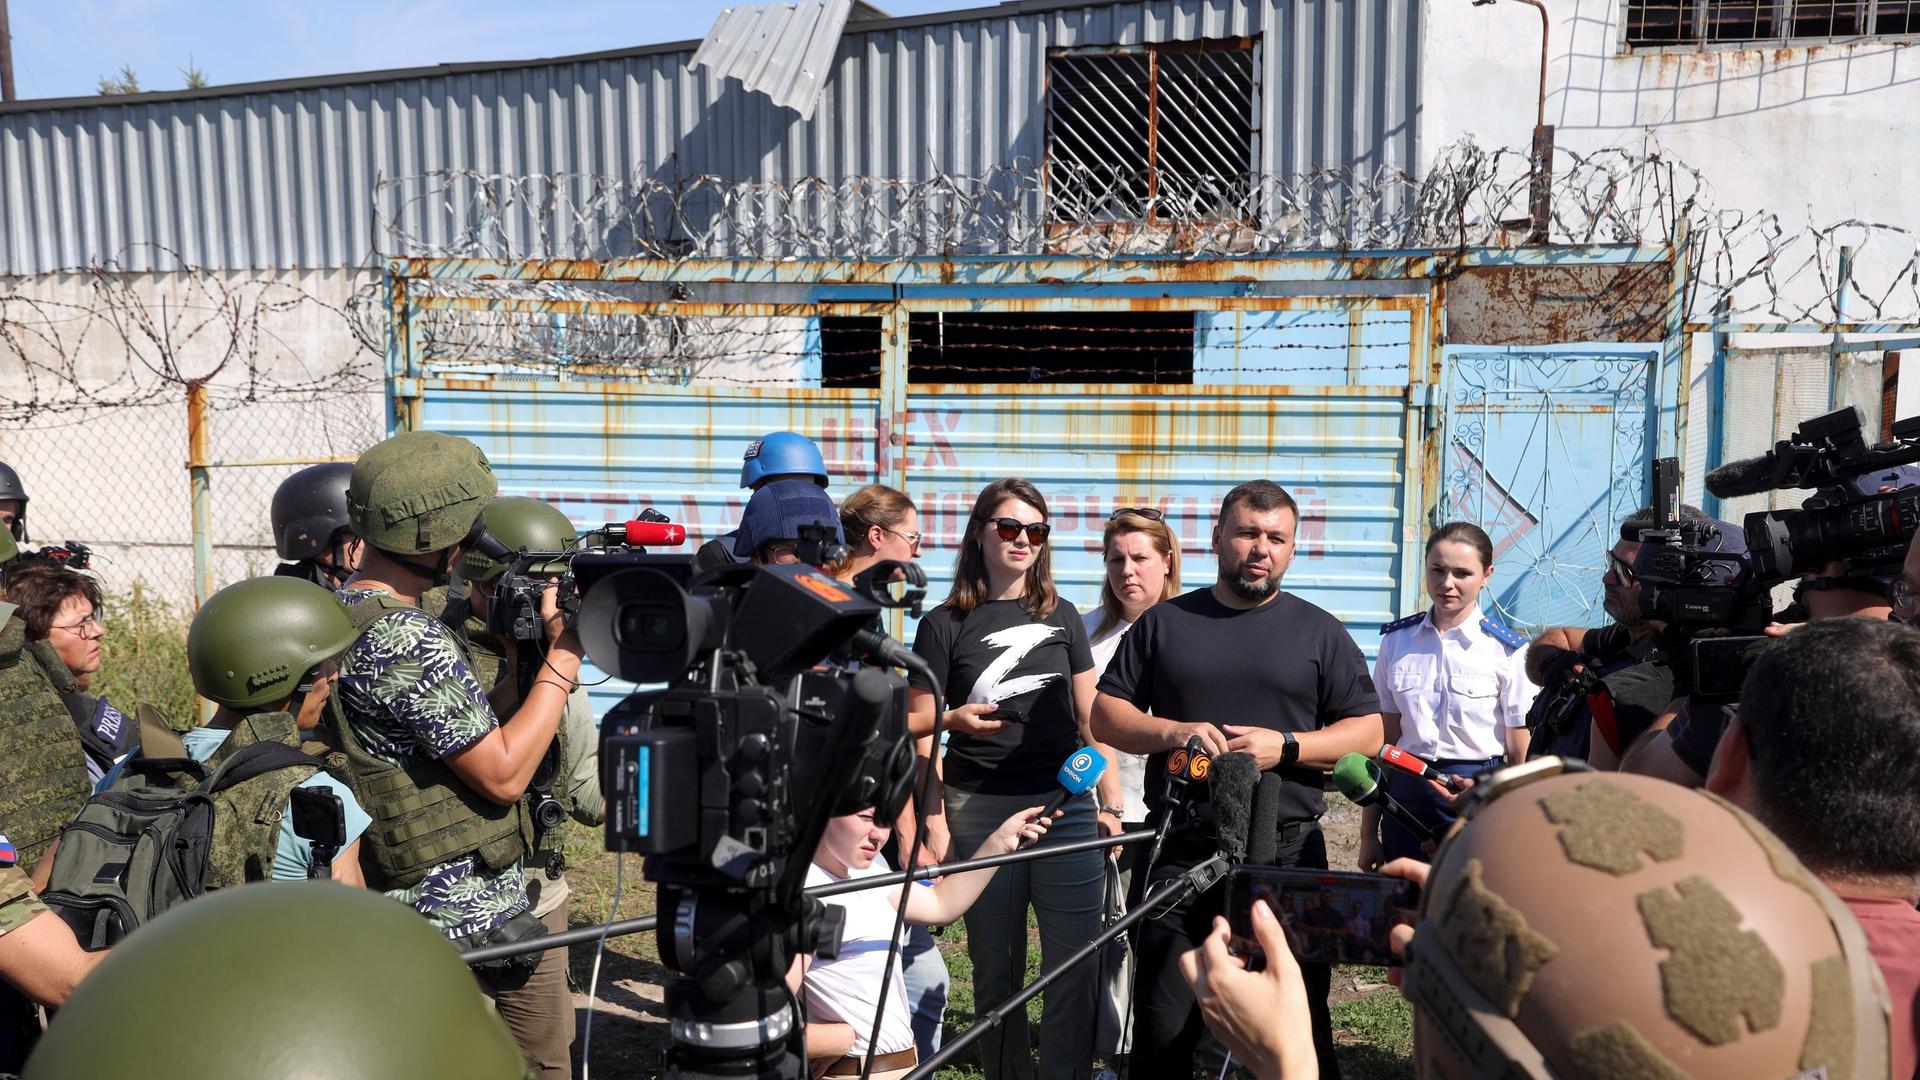 Denis Pushilin, the leader of the Donetsk People's Republic, background second right, speaks to foreign journalists at the destroyed barrack by following a strike on a prison housing POWs in Olenivka during a trip organized by the Russian Ministry of Defense, on the territory which is under the Government of the Donetsk People's Republic control, eastern Ukraine, Wednesday, Aug. 10, 2022. Russia has claimed that Ukraine's military used U.S.-supplied rocket launchers to strike the prison in Olenivka, a settlement controlled by the Moscow-backed Donetsk People's Republic. The Ukrainian military denied making any rocket or artillery strikes in Olenivka. (AP Photo)